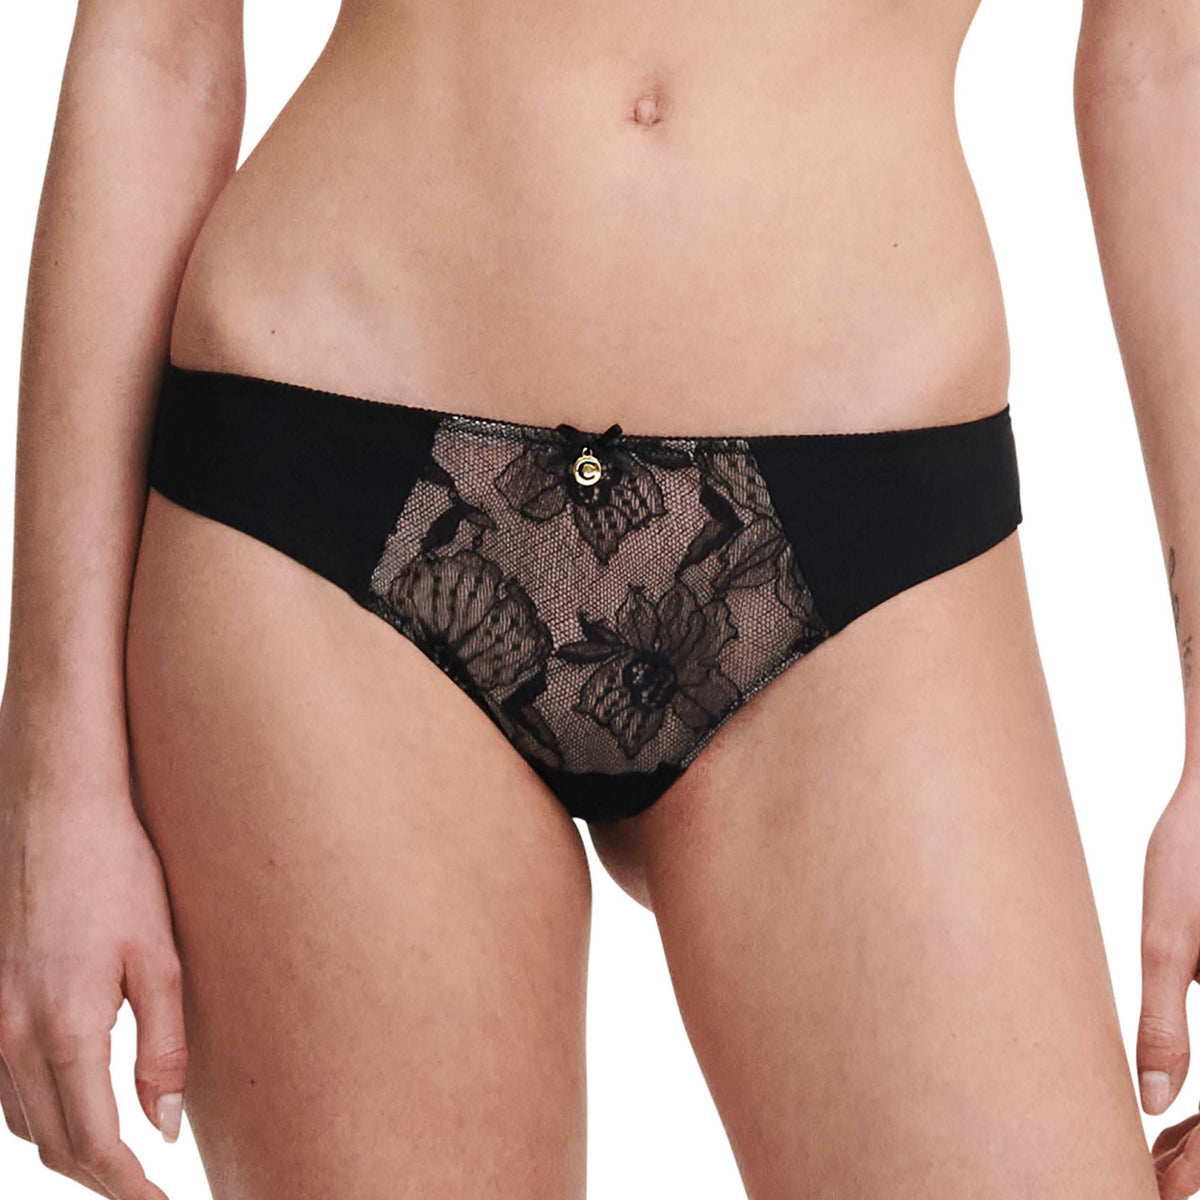 Black lace Chantelle Orchids thong panty with gold-colour finishes